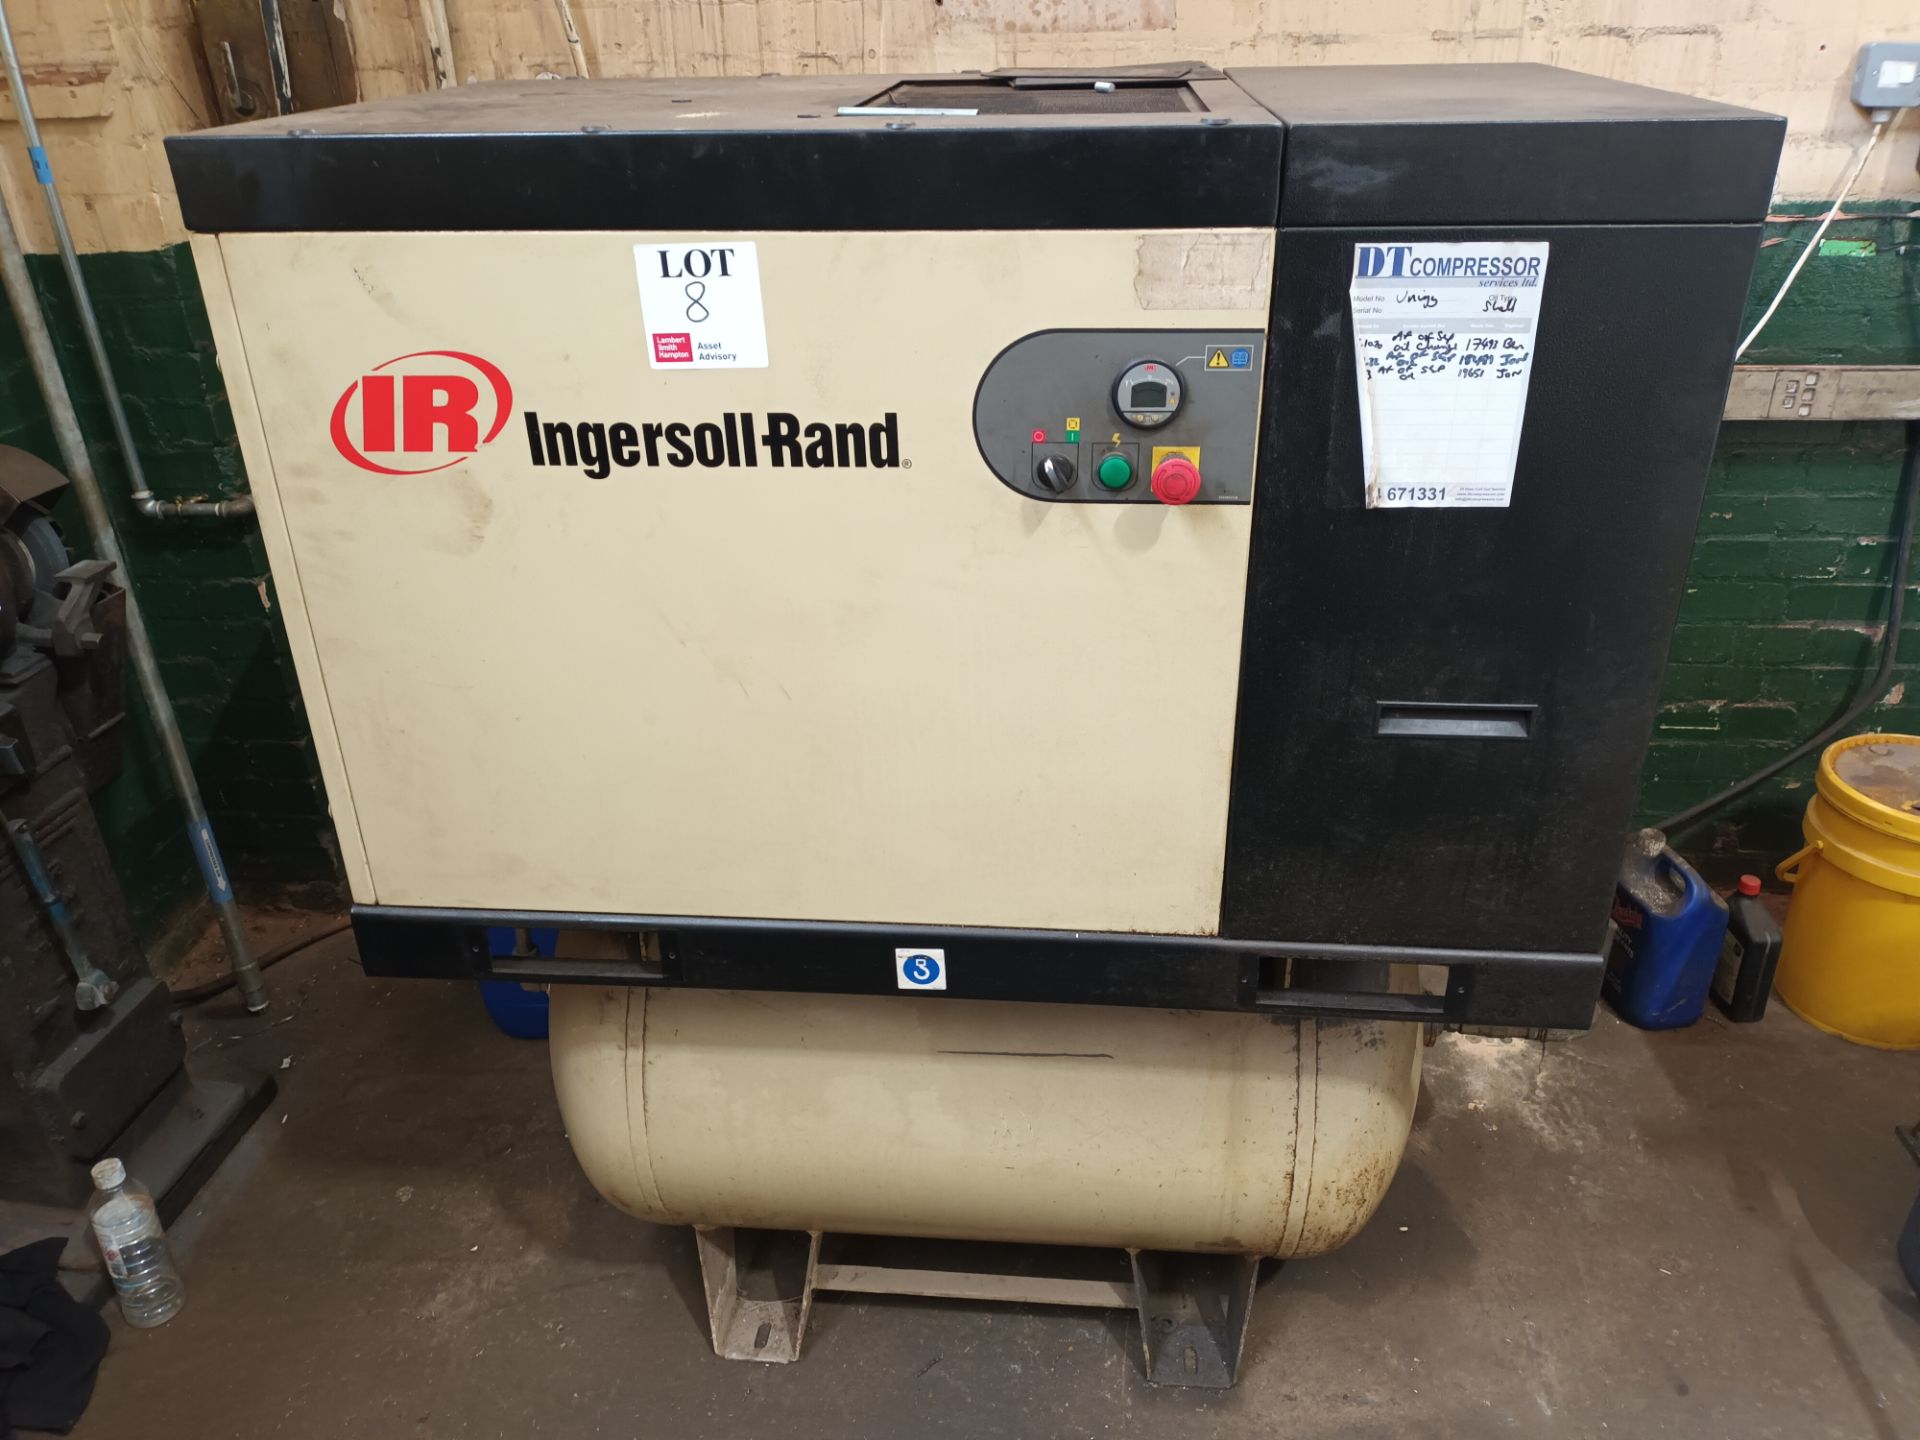 Ingersoll Rand receiver mounted packaged air compressor Serial no. 2150933 (2005)